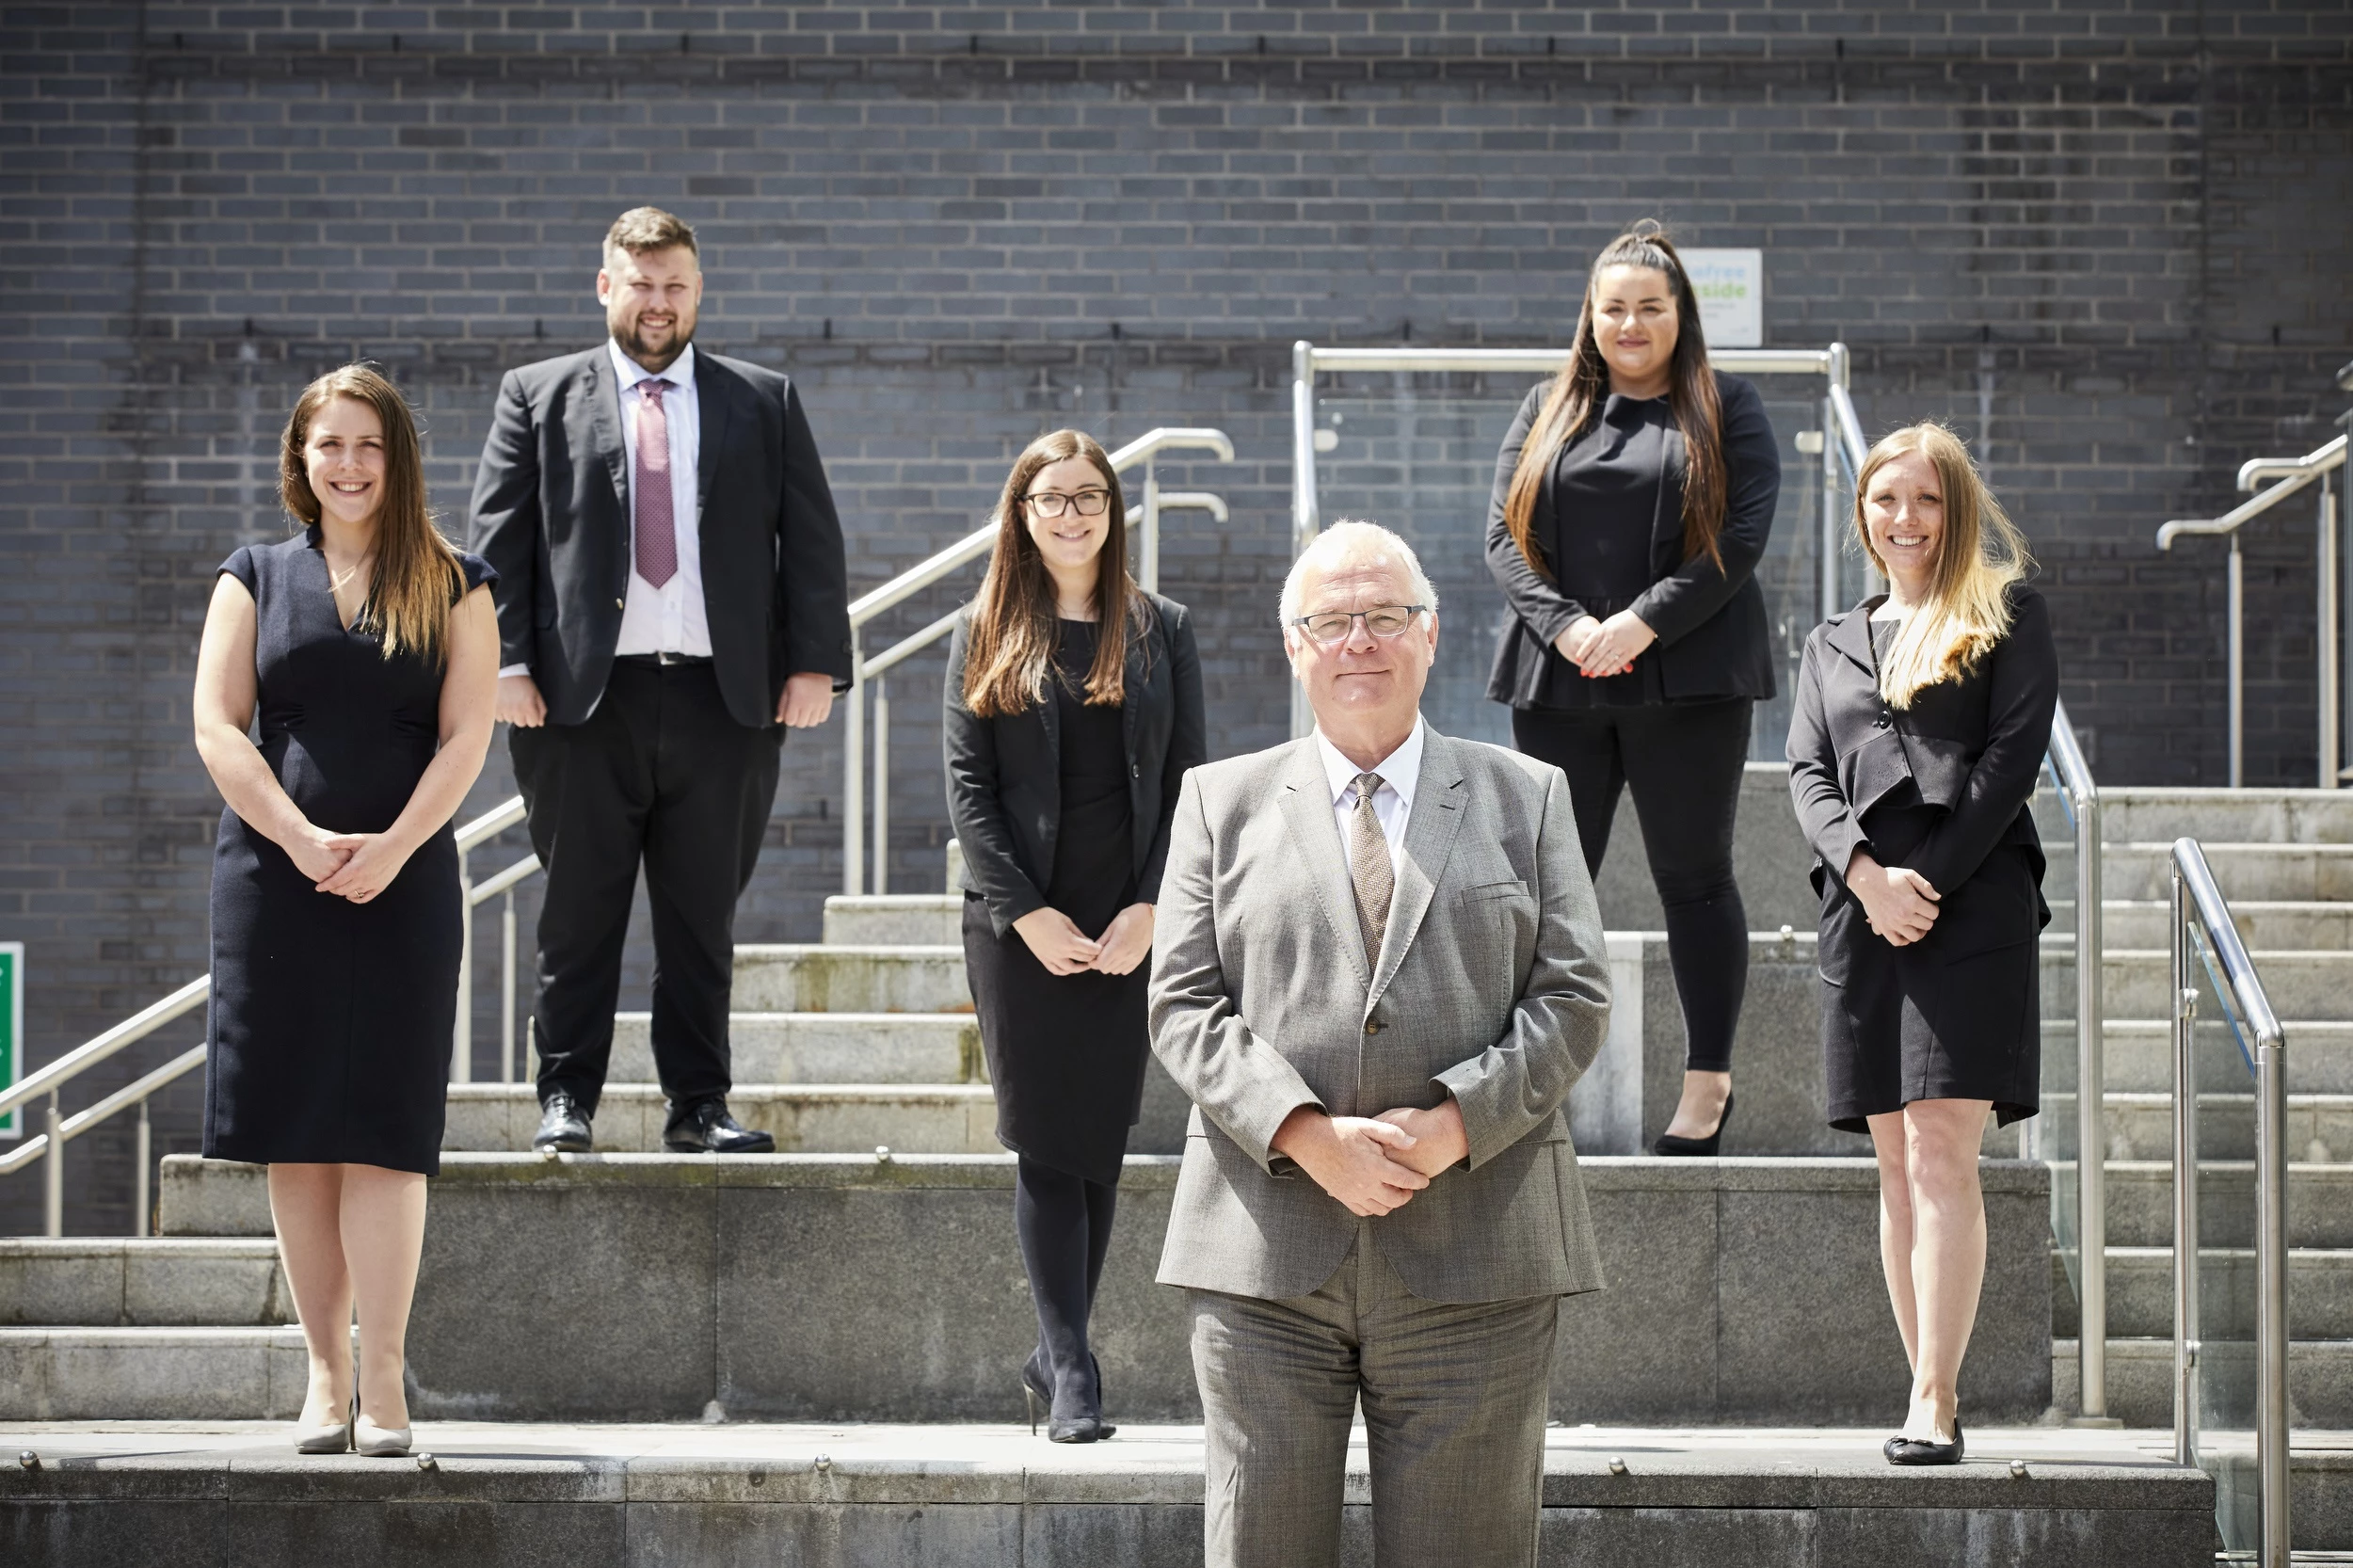 New faces at Bromleys Solicitors